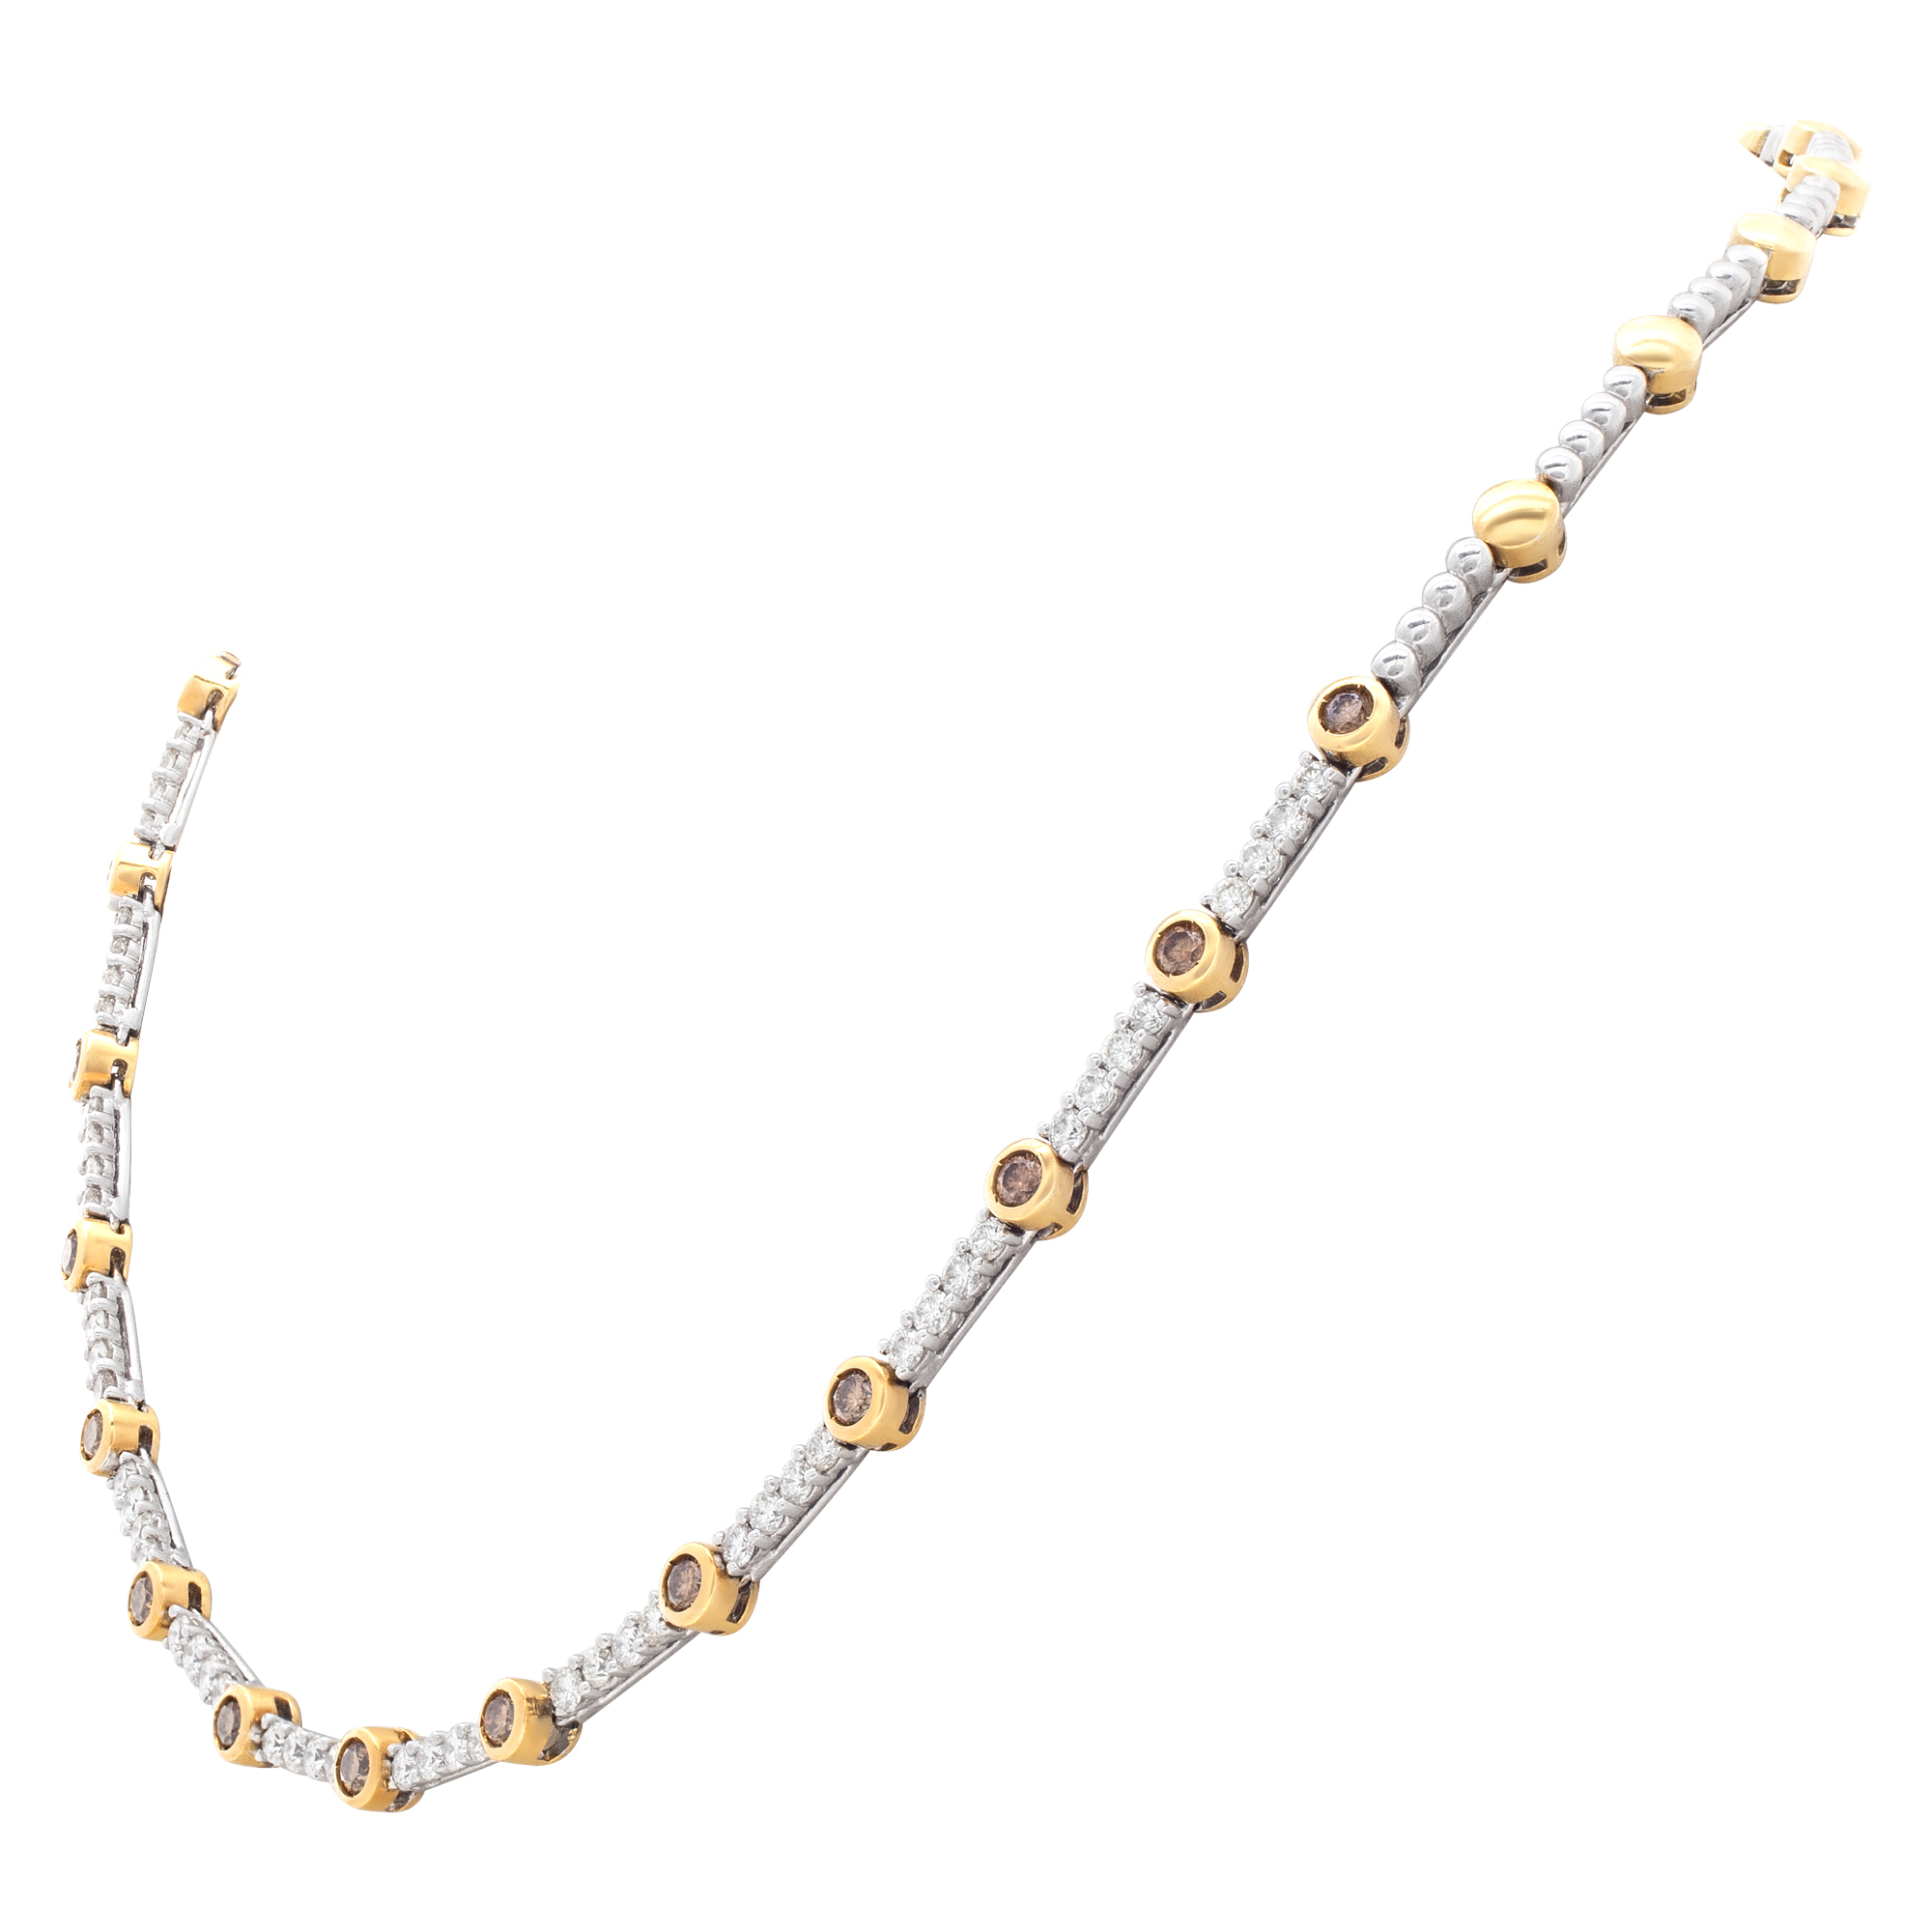 Stunning 18k white and yellow gold necklace with white and yellow diamonds image 3